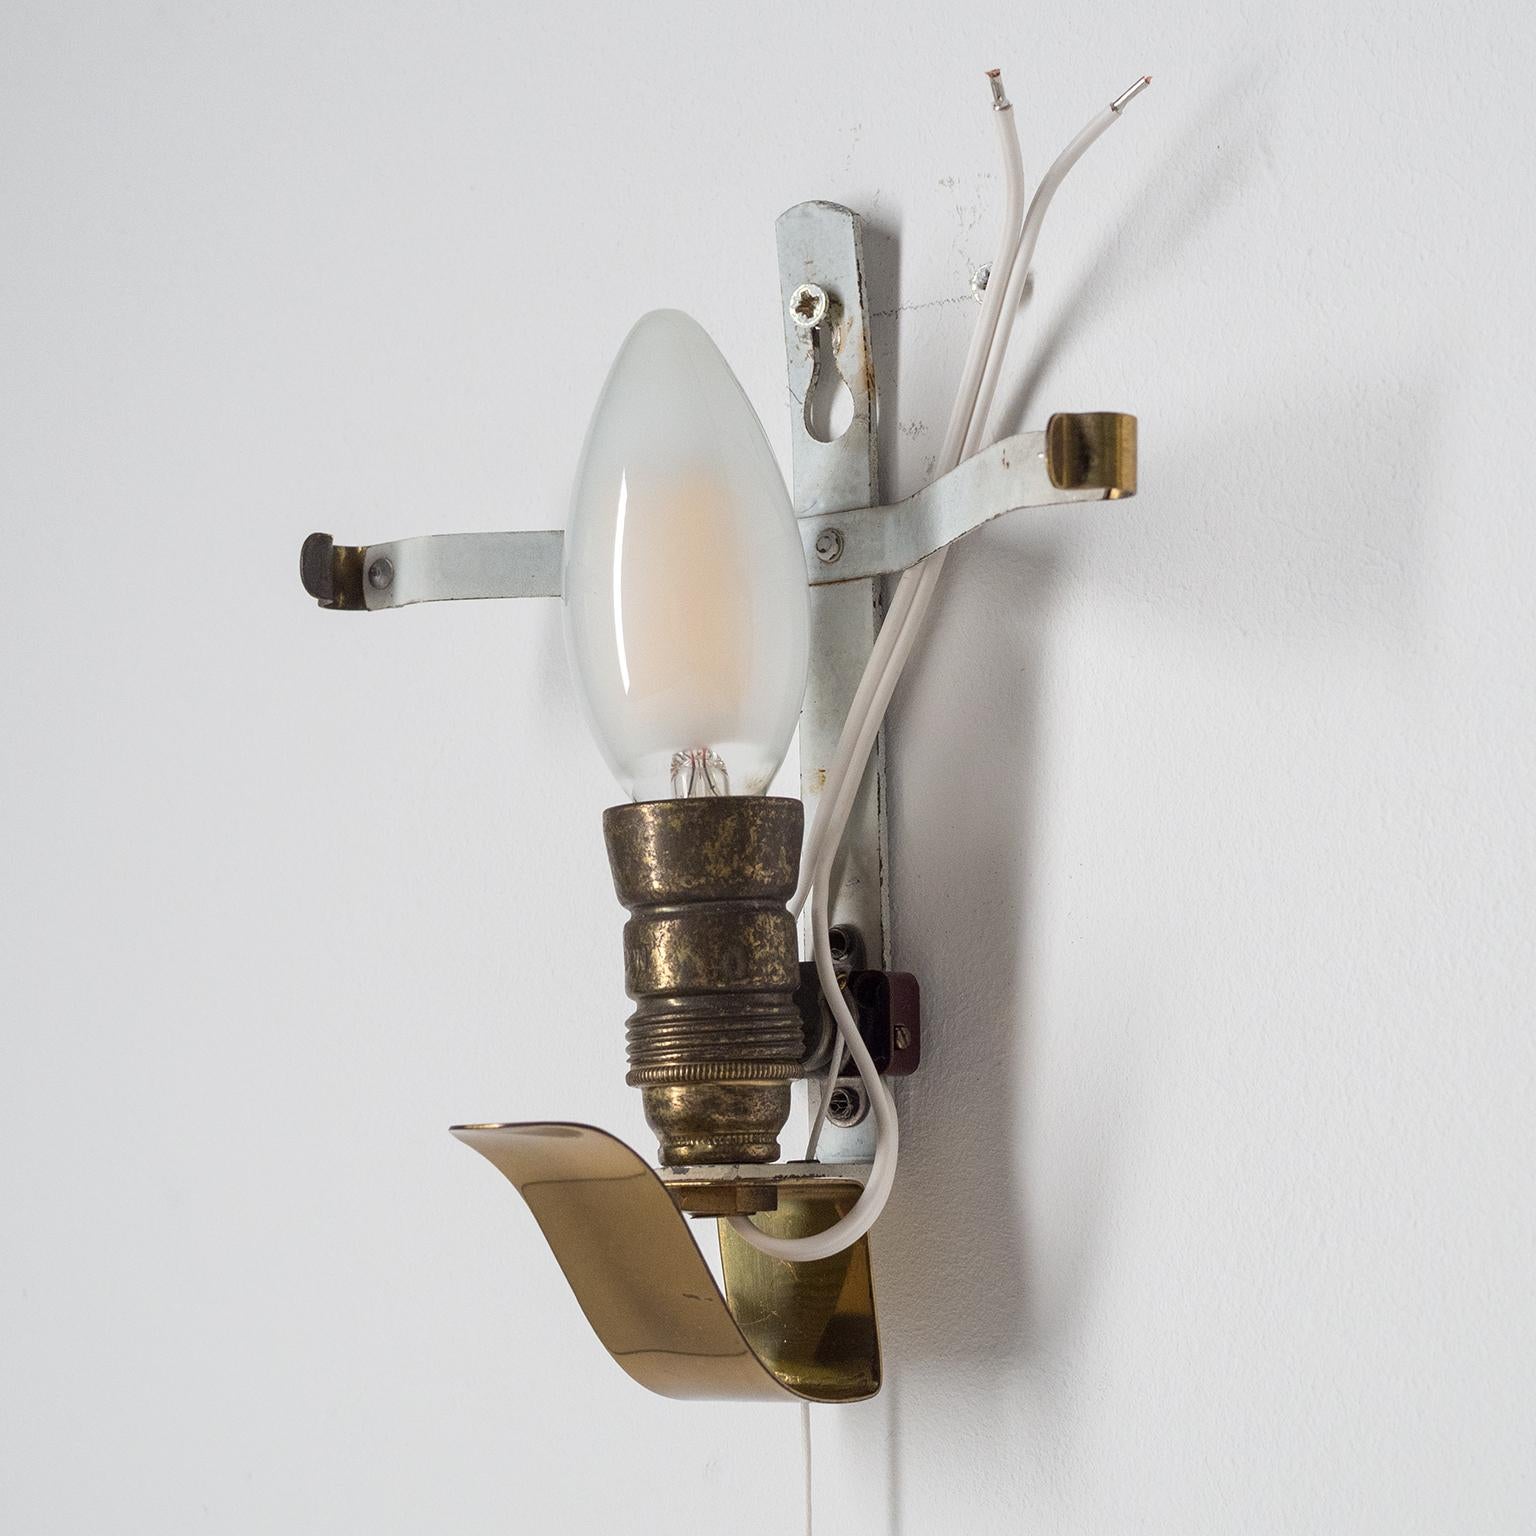 Pair of Art Deco Sconces, 1940s, Enameled Glass and Brass 1